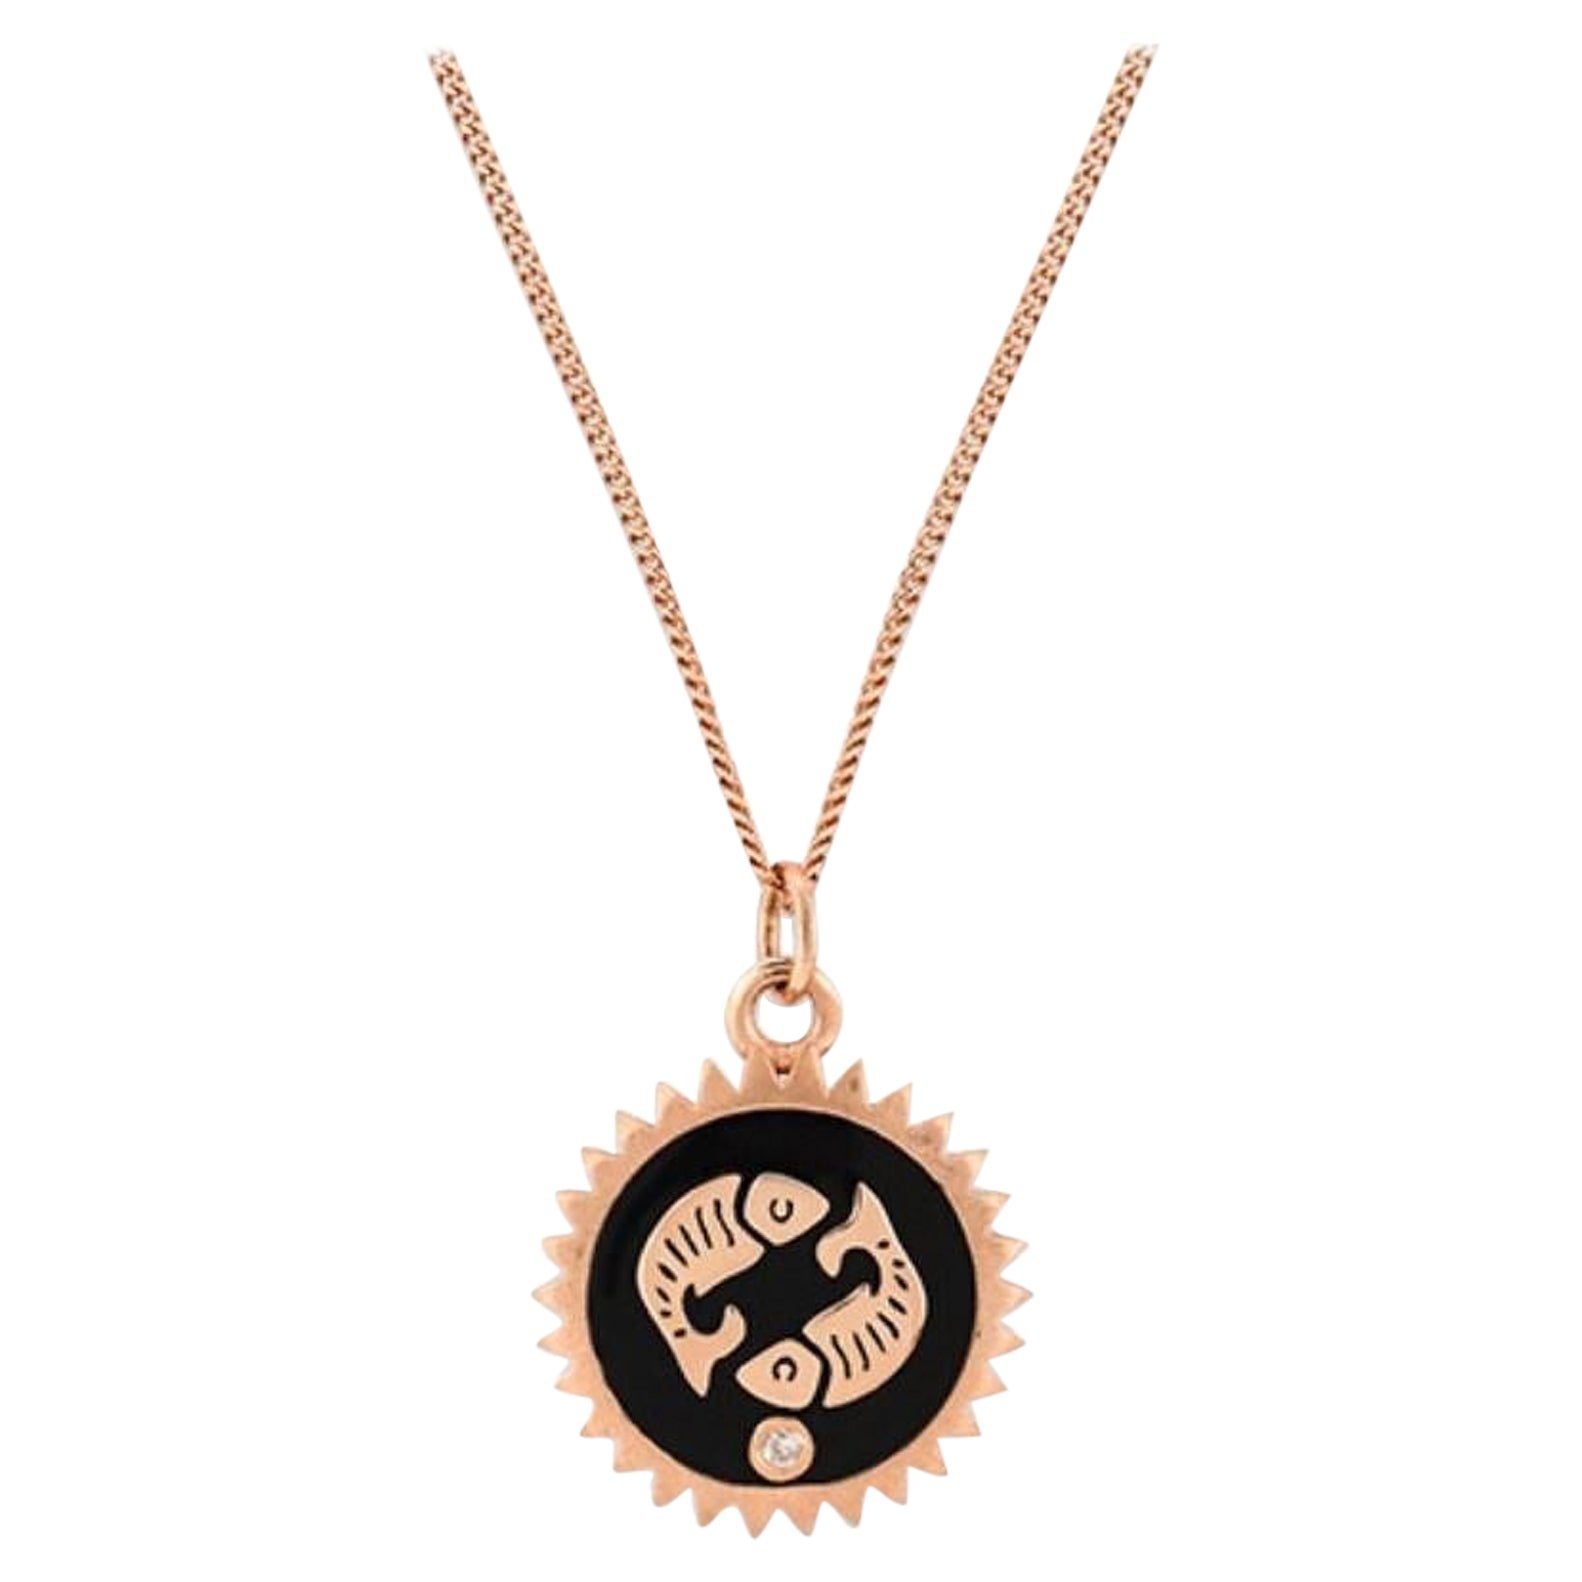 Pisces Necklace in 14K Rose Gold with Black Enamel & White Diamond For Sale